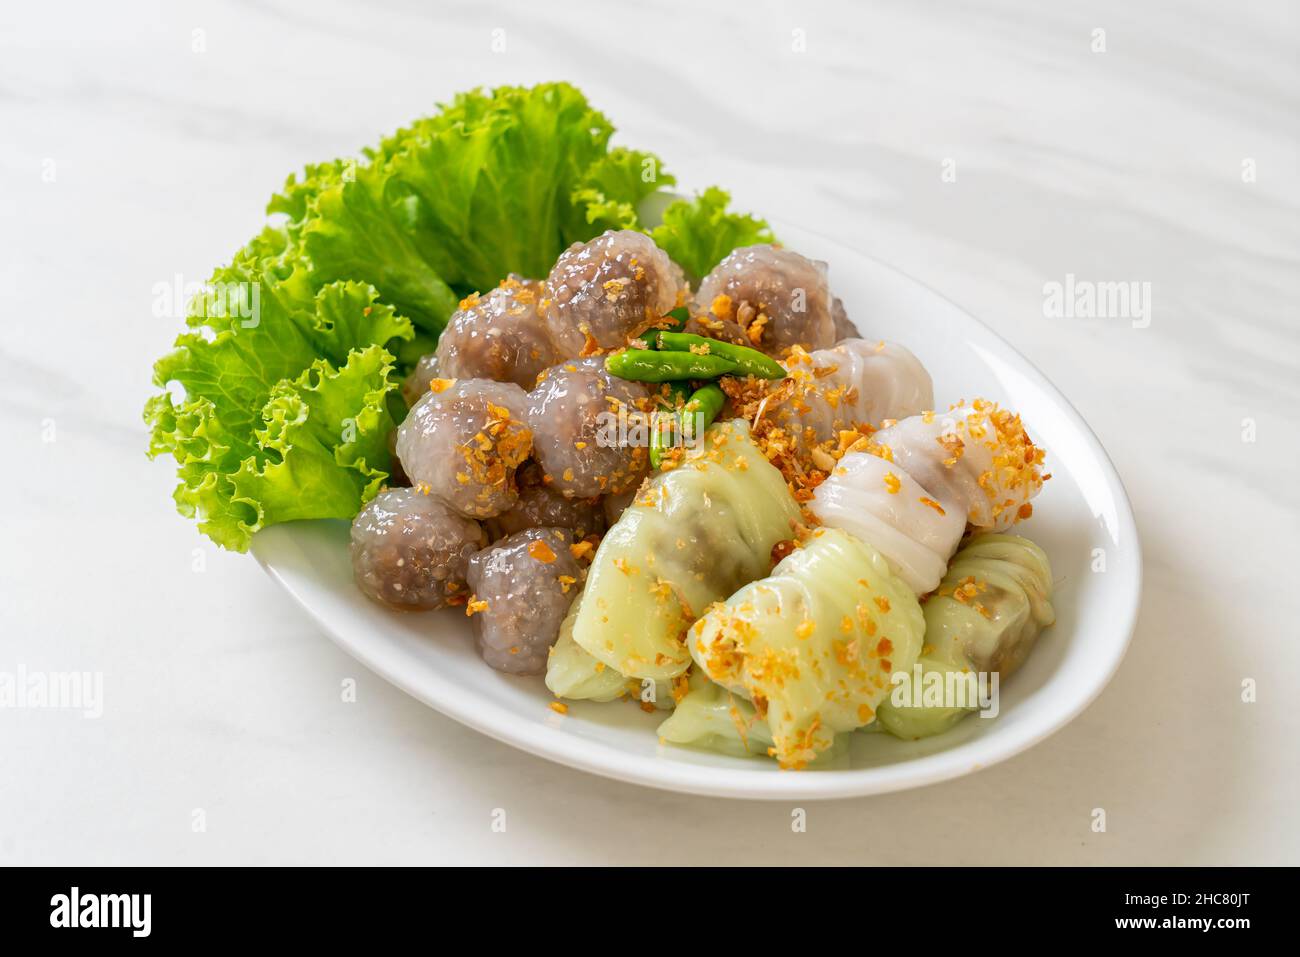 The transparent balls are called Saku Sai Moo or Steamed Tapioca Dumplings Ball with Pork Filling and ( Kow Griep Pag Mor)Pork Steamed Rice Parcels or Stock Photo